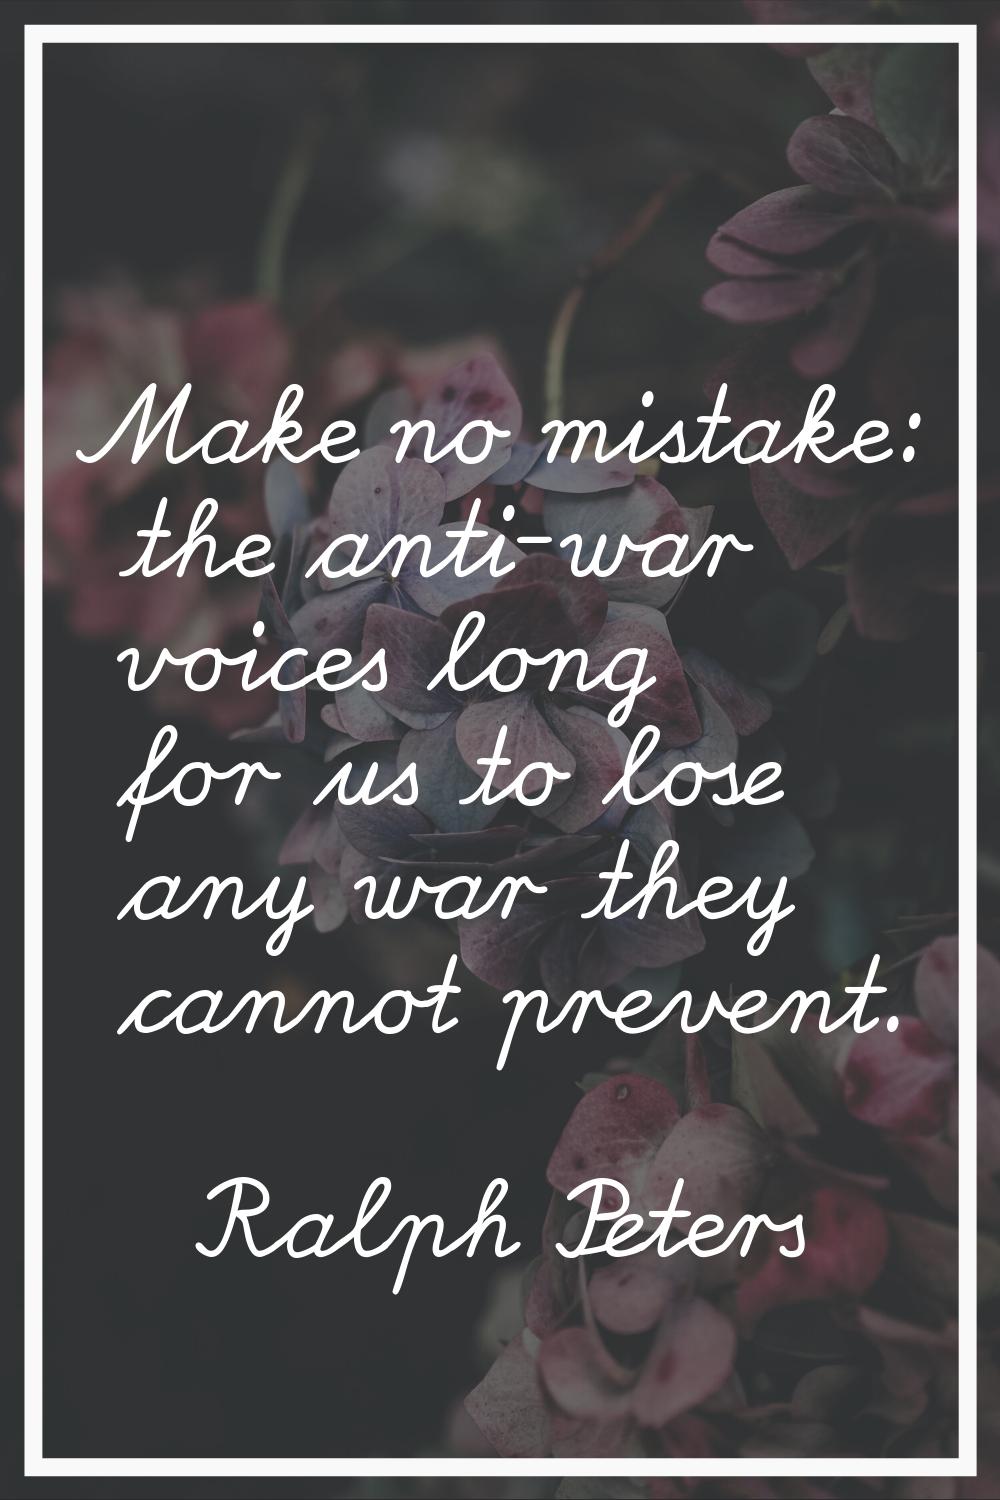 Make no mistake: the anti-war voices long for us to lose any war they cannot prevent.